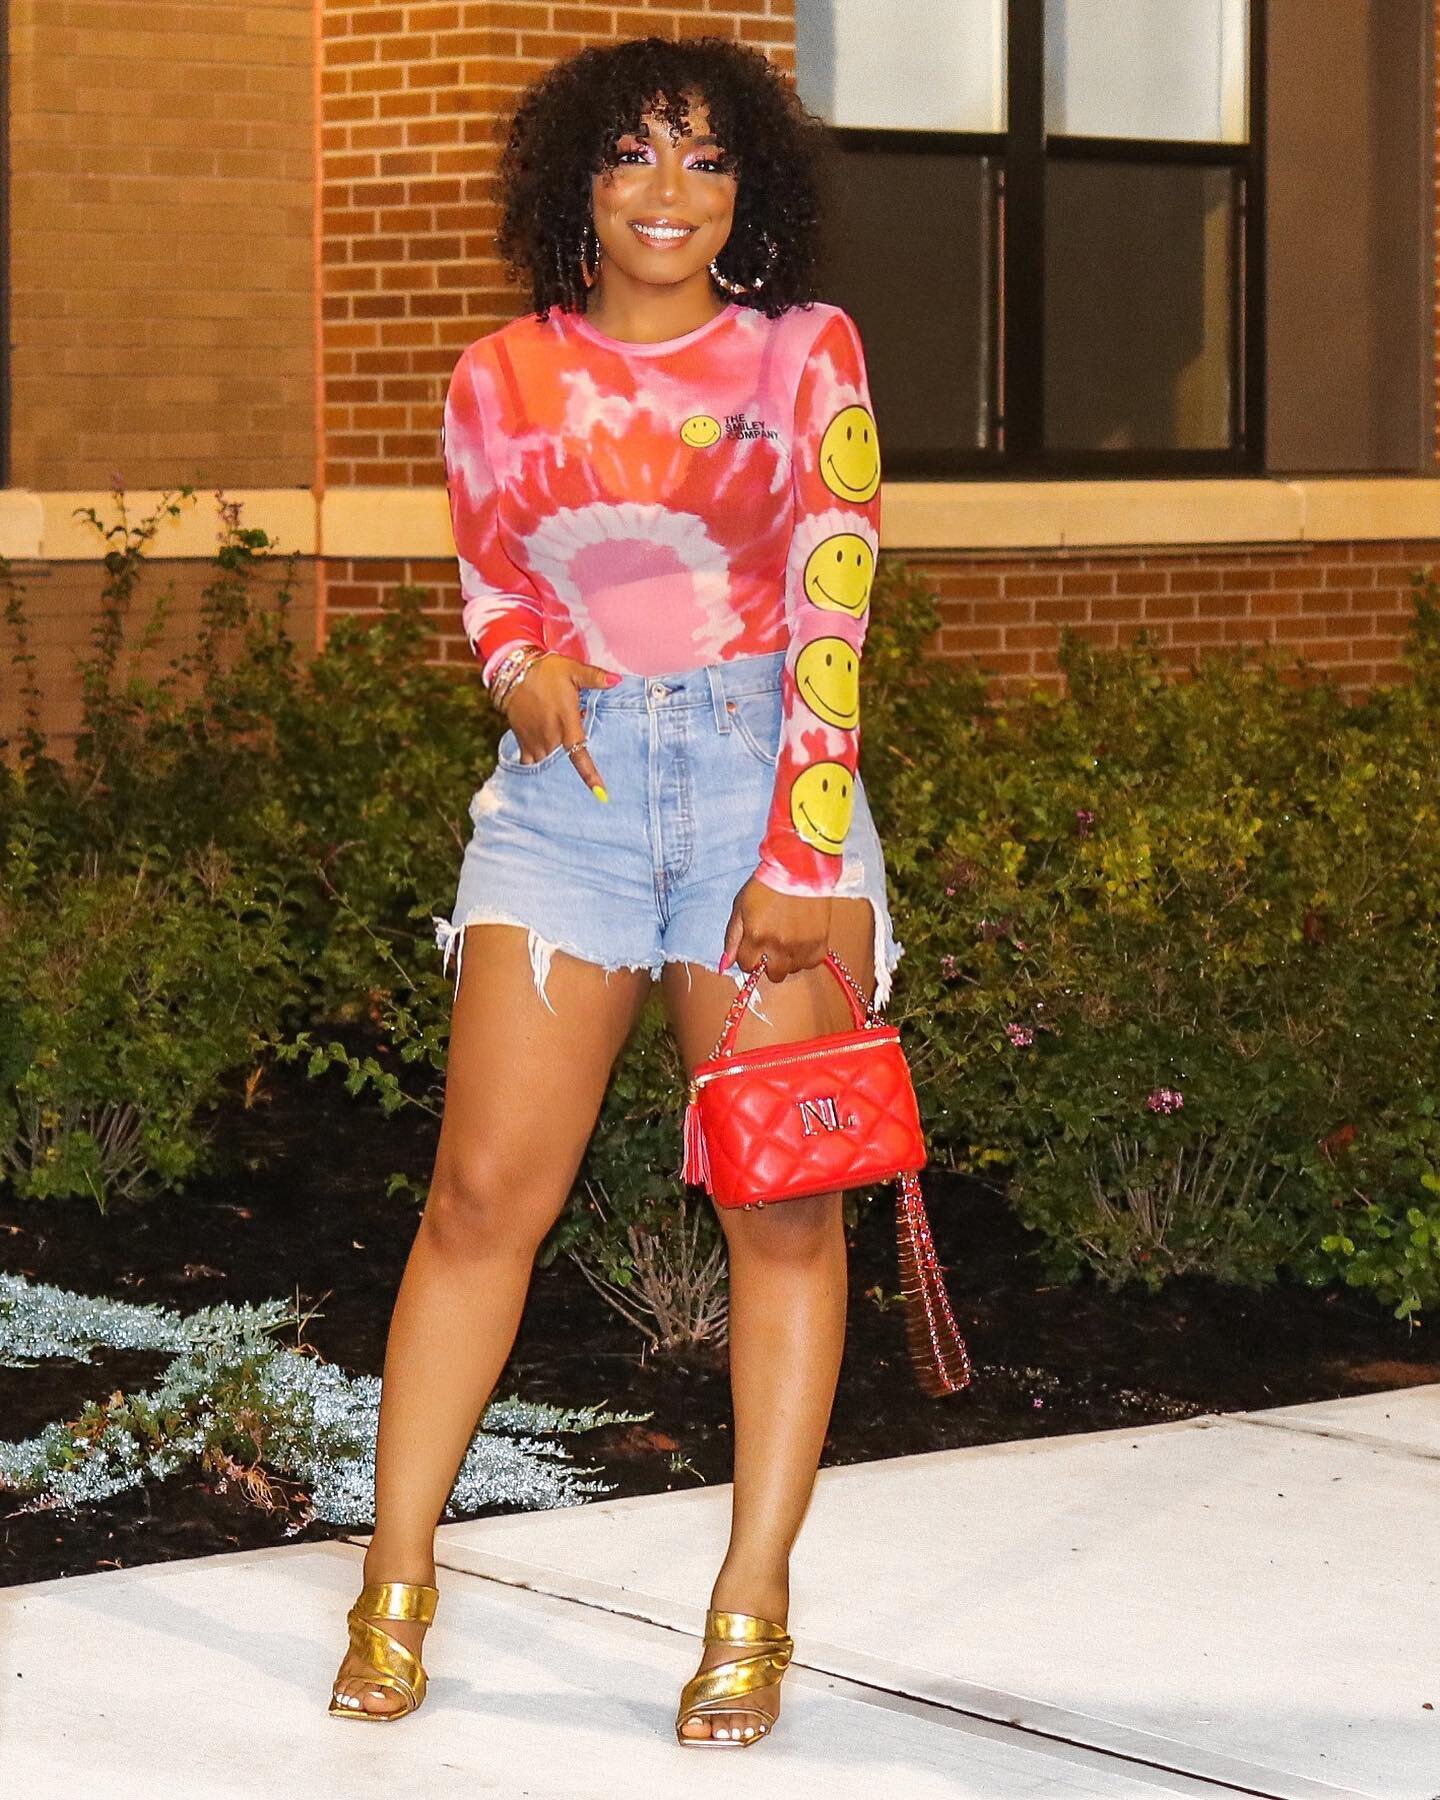 All smiles this weekend🥰. I went to see my girl @tasiasword and she put her all on that stage. Her voice is truly amazing! Such a great show. Wishing you all a blessed week. 

 .
.
.
.
Bodysuit: @zara 
Shorts: @levis 
Heels: @egoofficial 
Purse: @nl